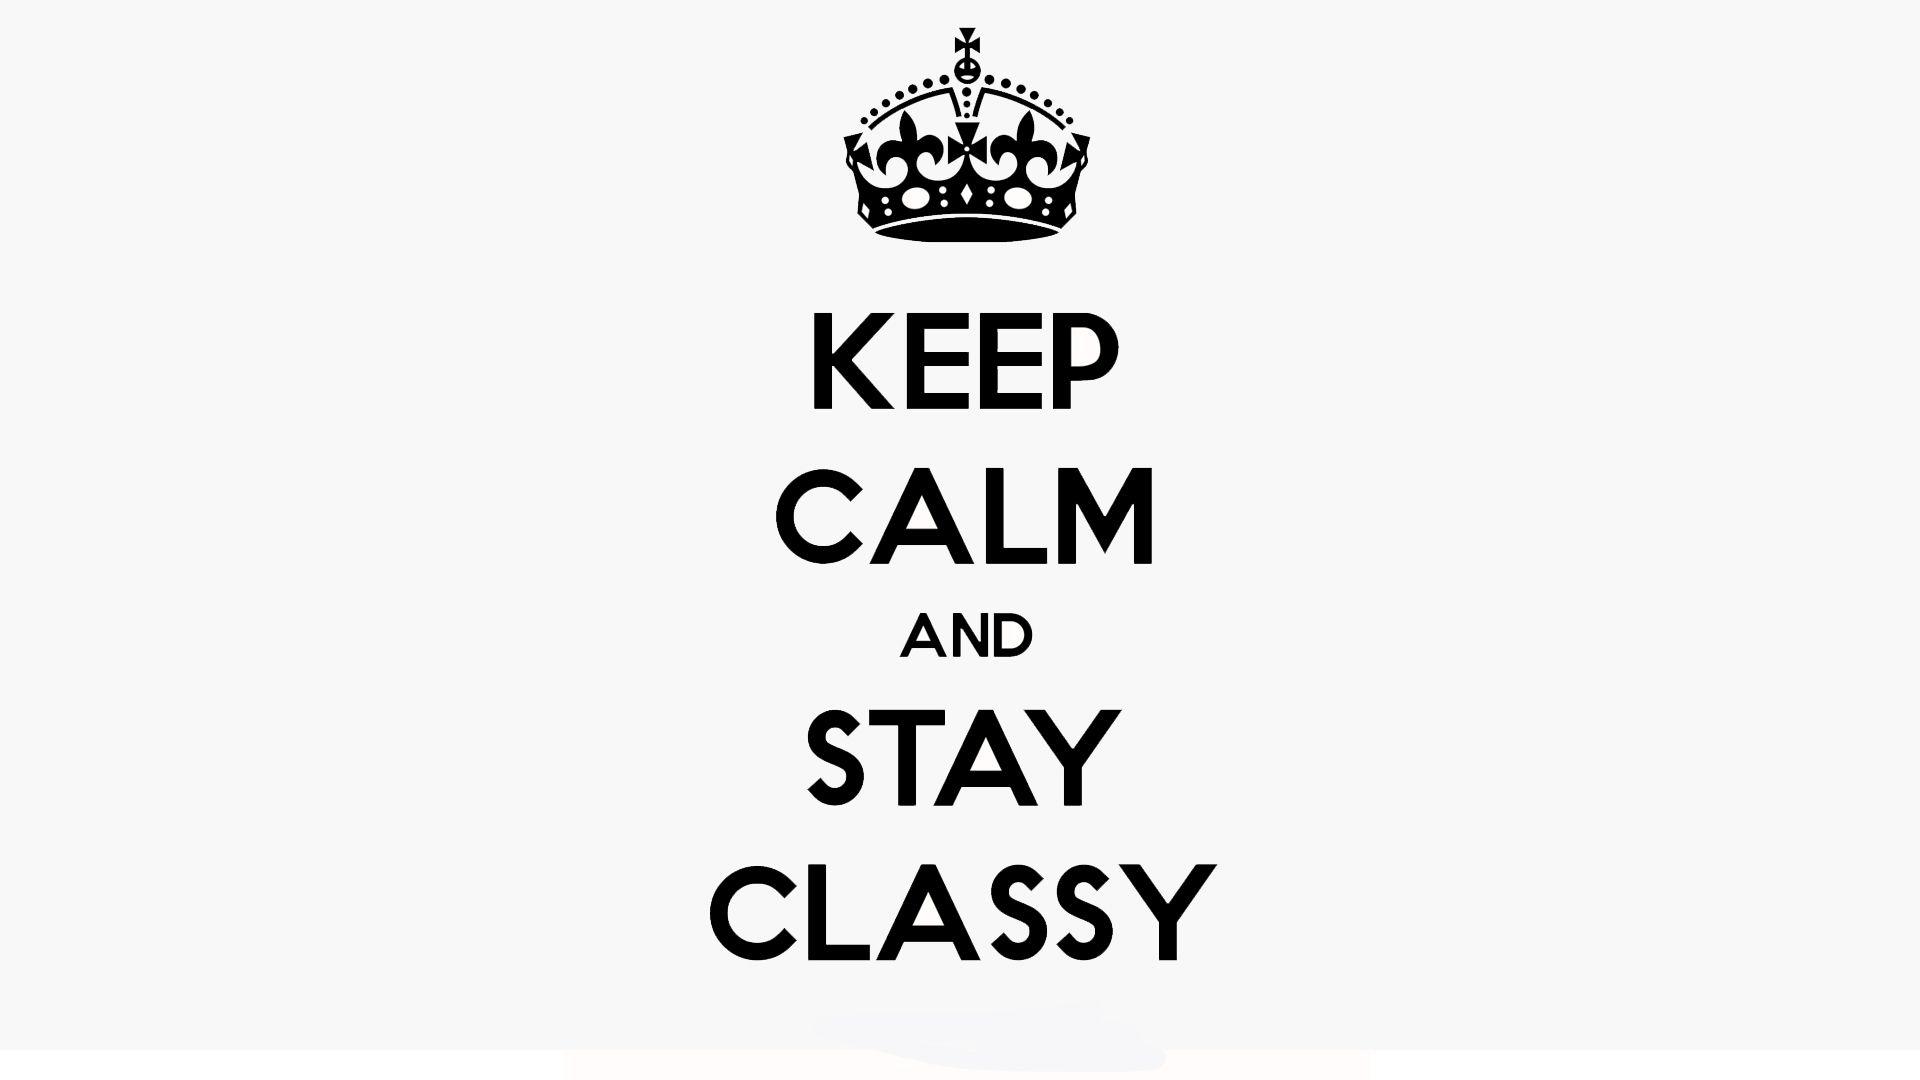 Keep Calm & Stay Classy image. Beautiful image HD Picture